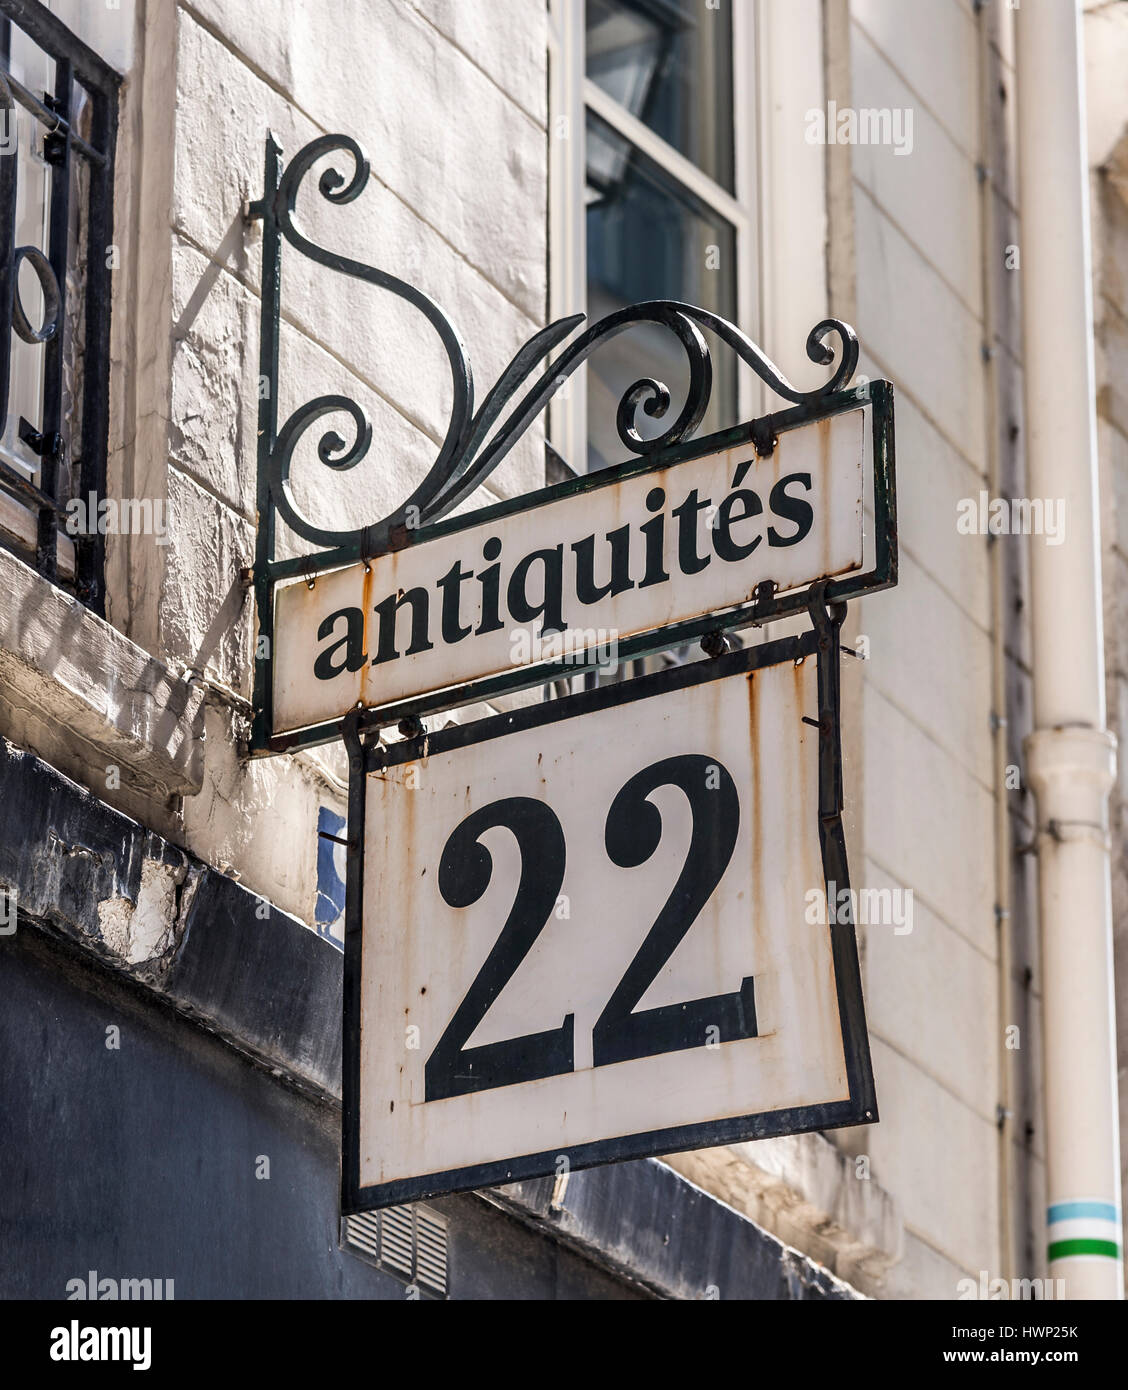 Antiquites 22 sign outside a building in Paris France. Stock Photo